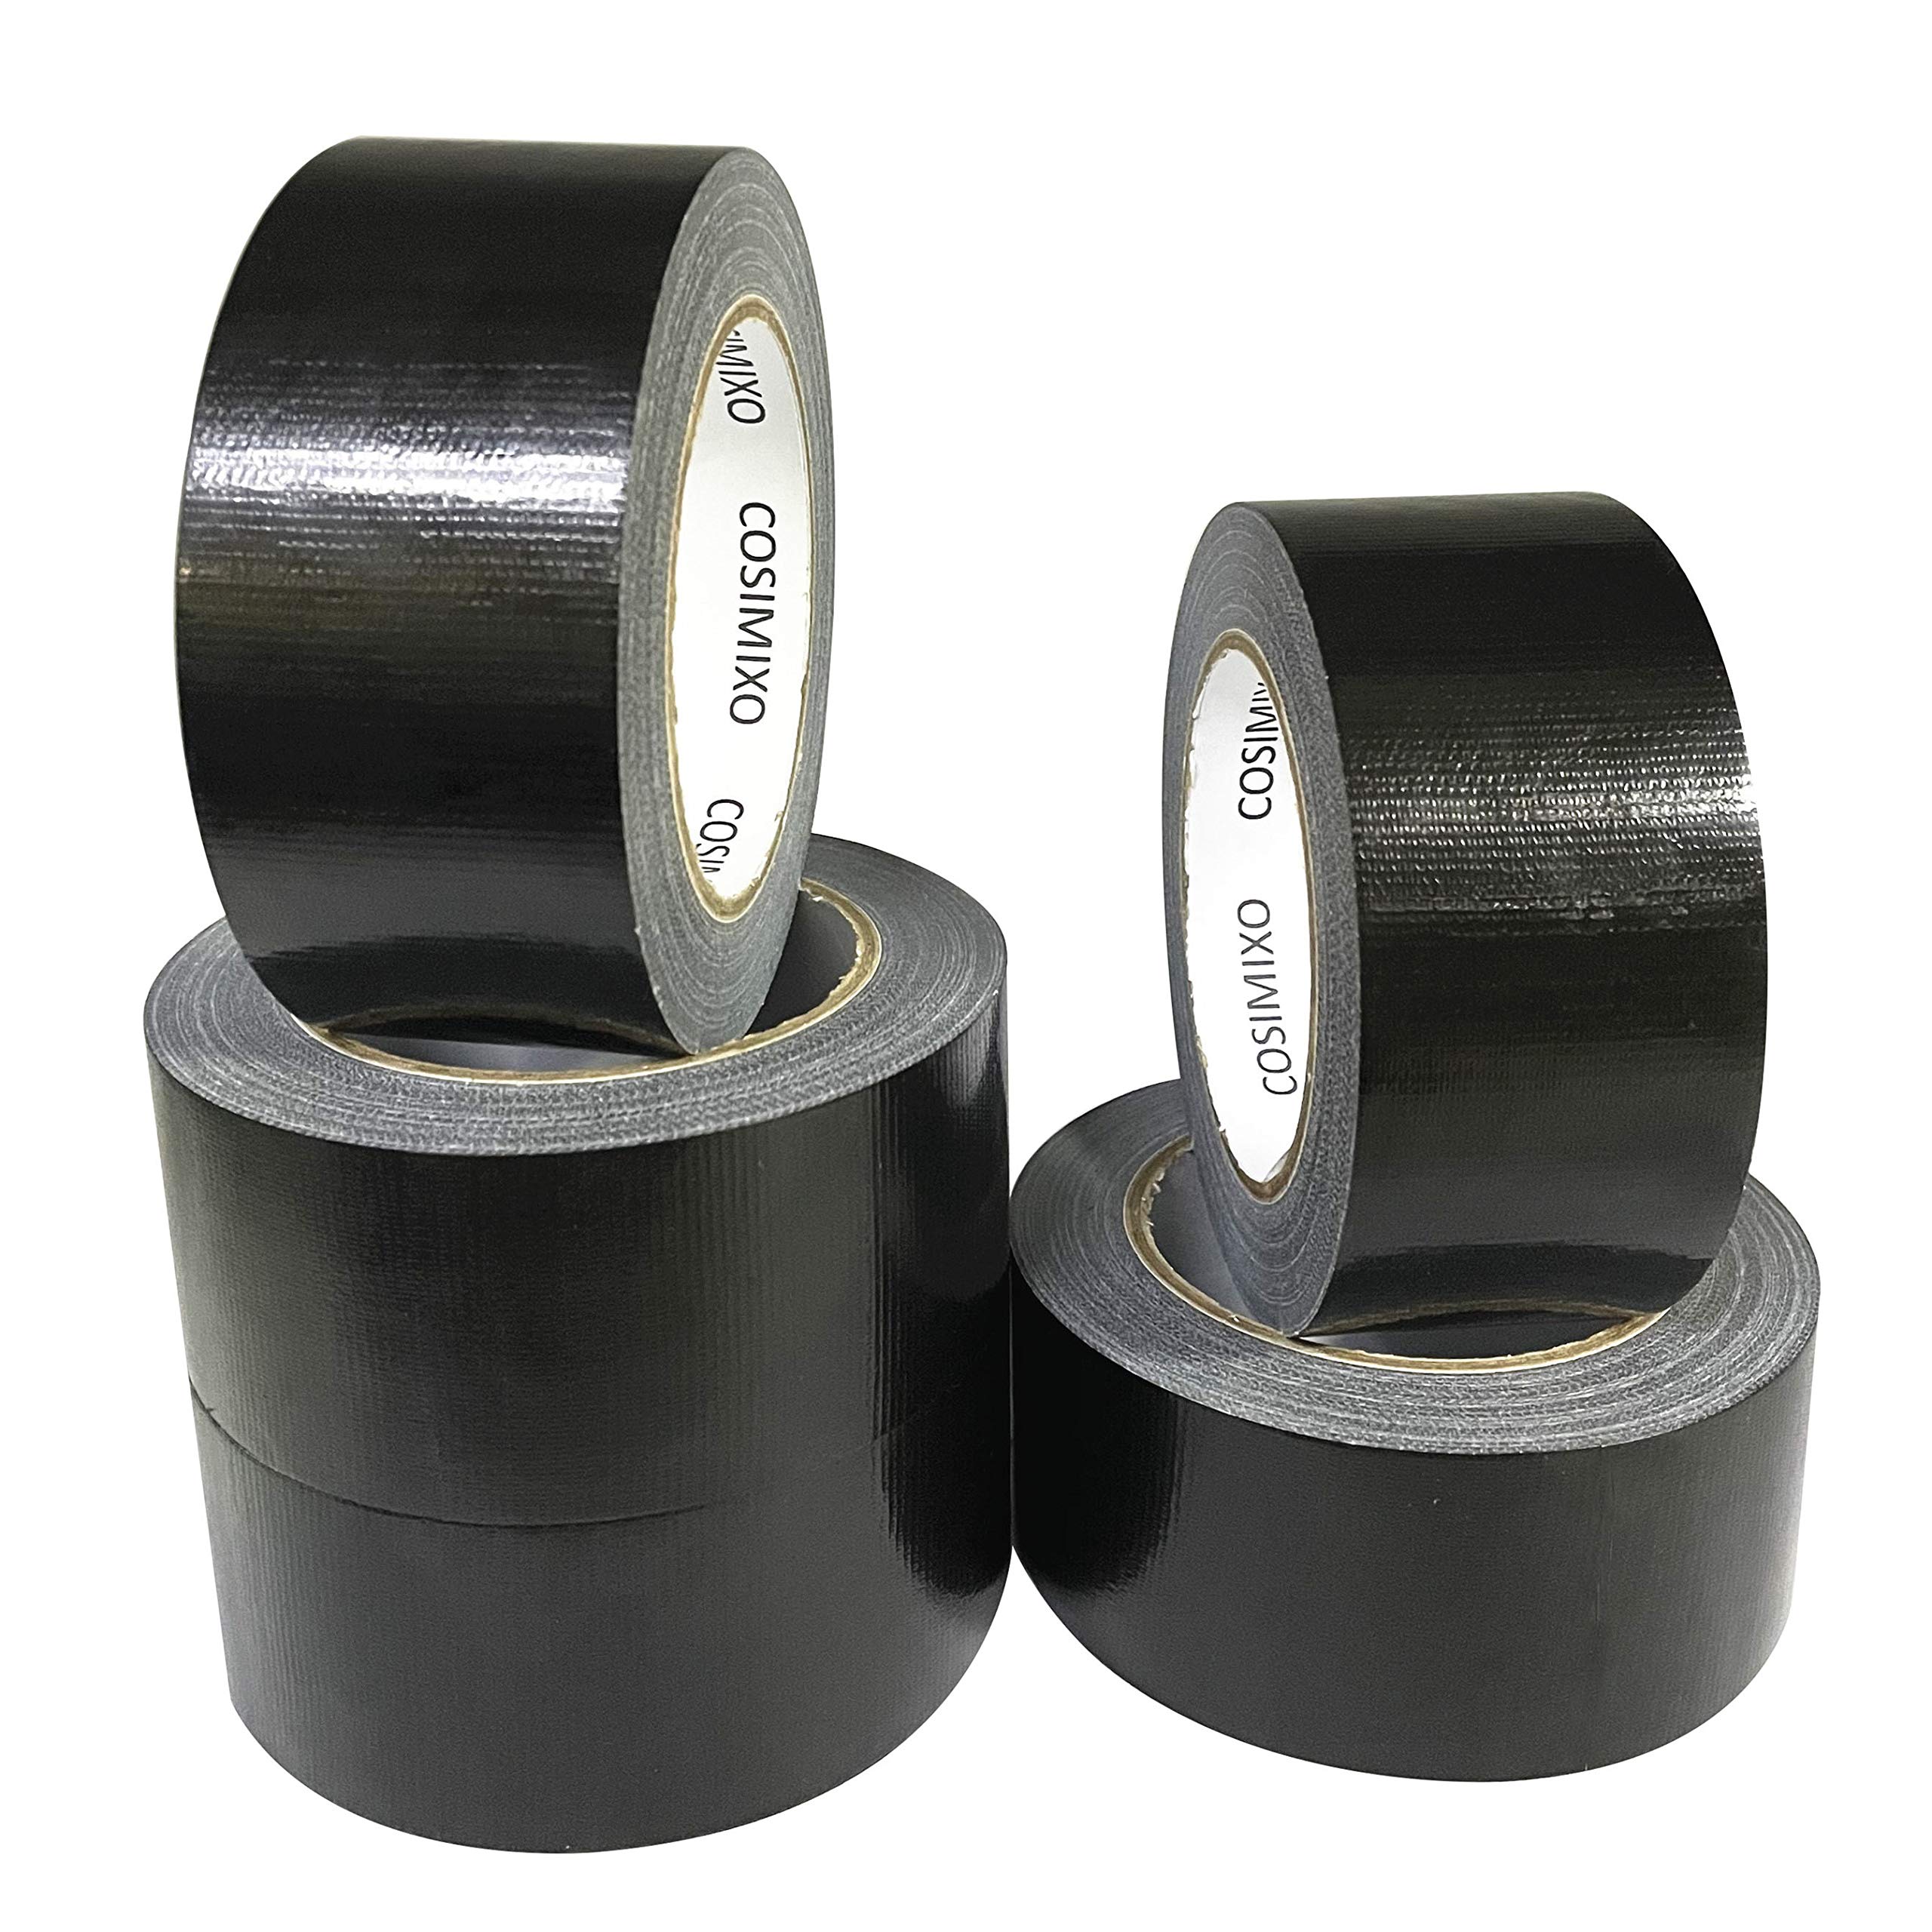 COSIMIXO 5-Pack Black Heavy Duty Duct Tape, 2 Inches x 30 Yards, Strong, Flexible, No Residue, All-Weather and Tear by Hand - Bulk Value for Repairs